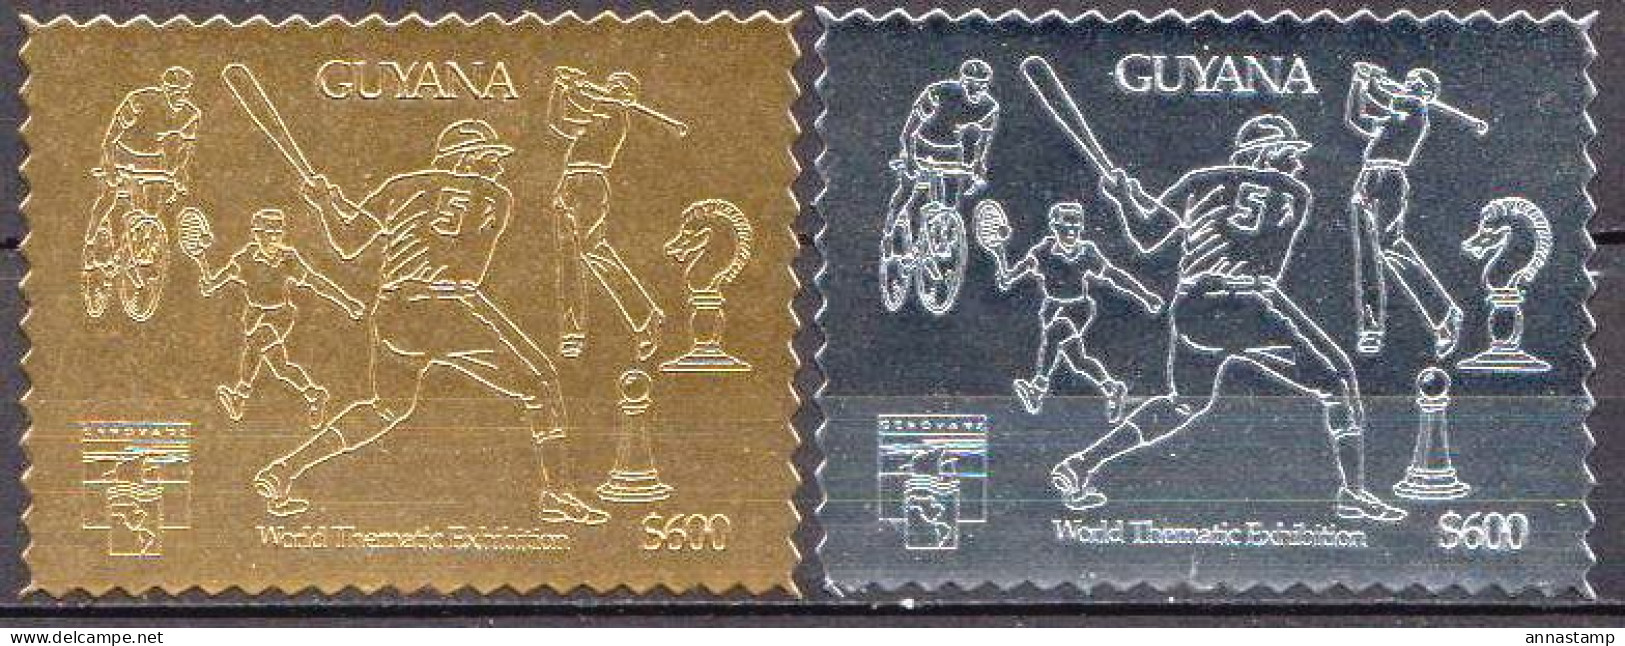 Guyana MNH Gold And Silver Foil Stamps - Baseball